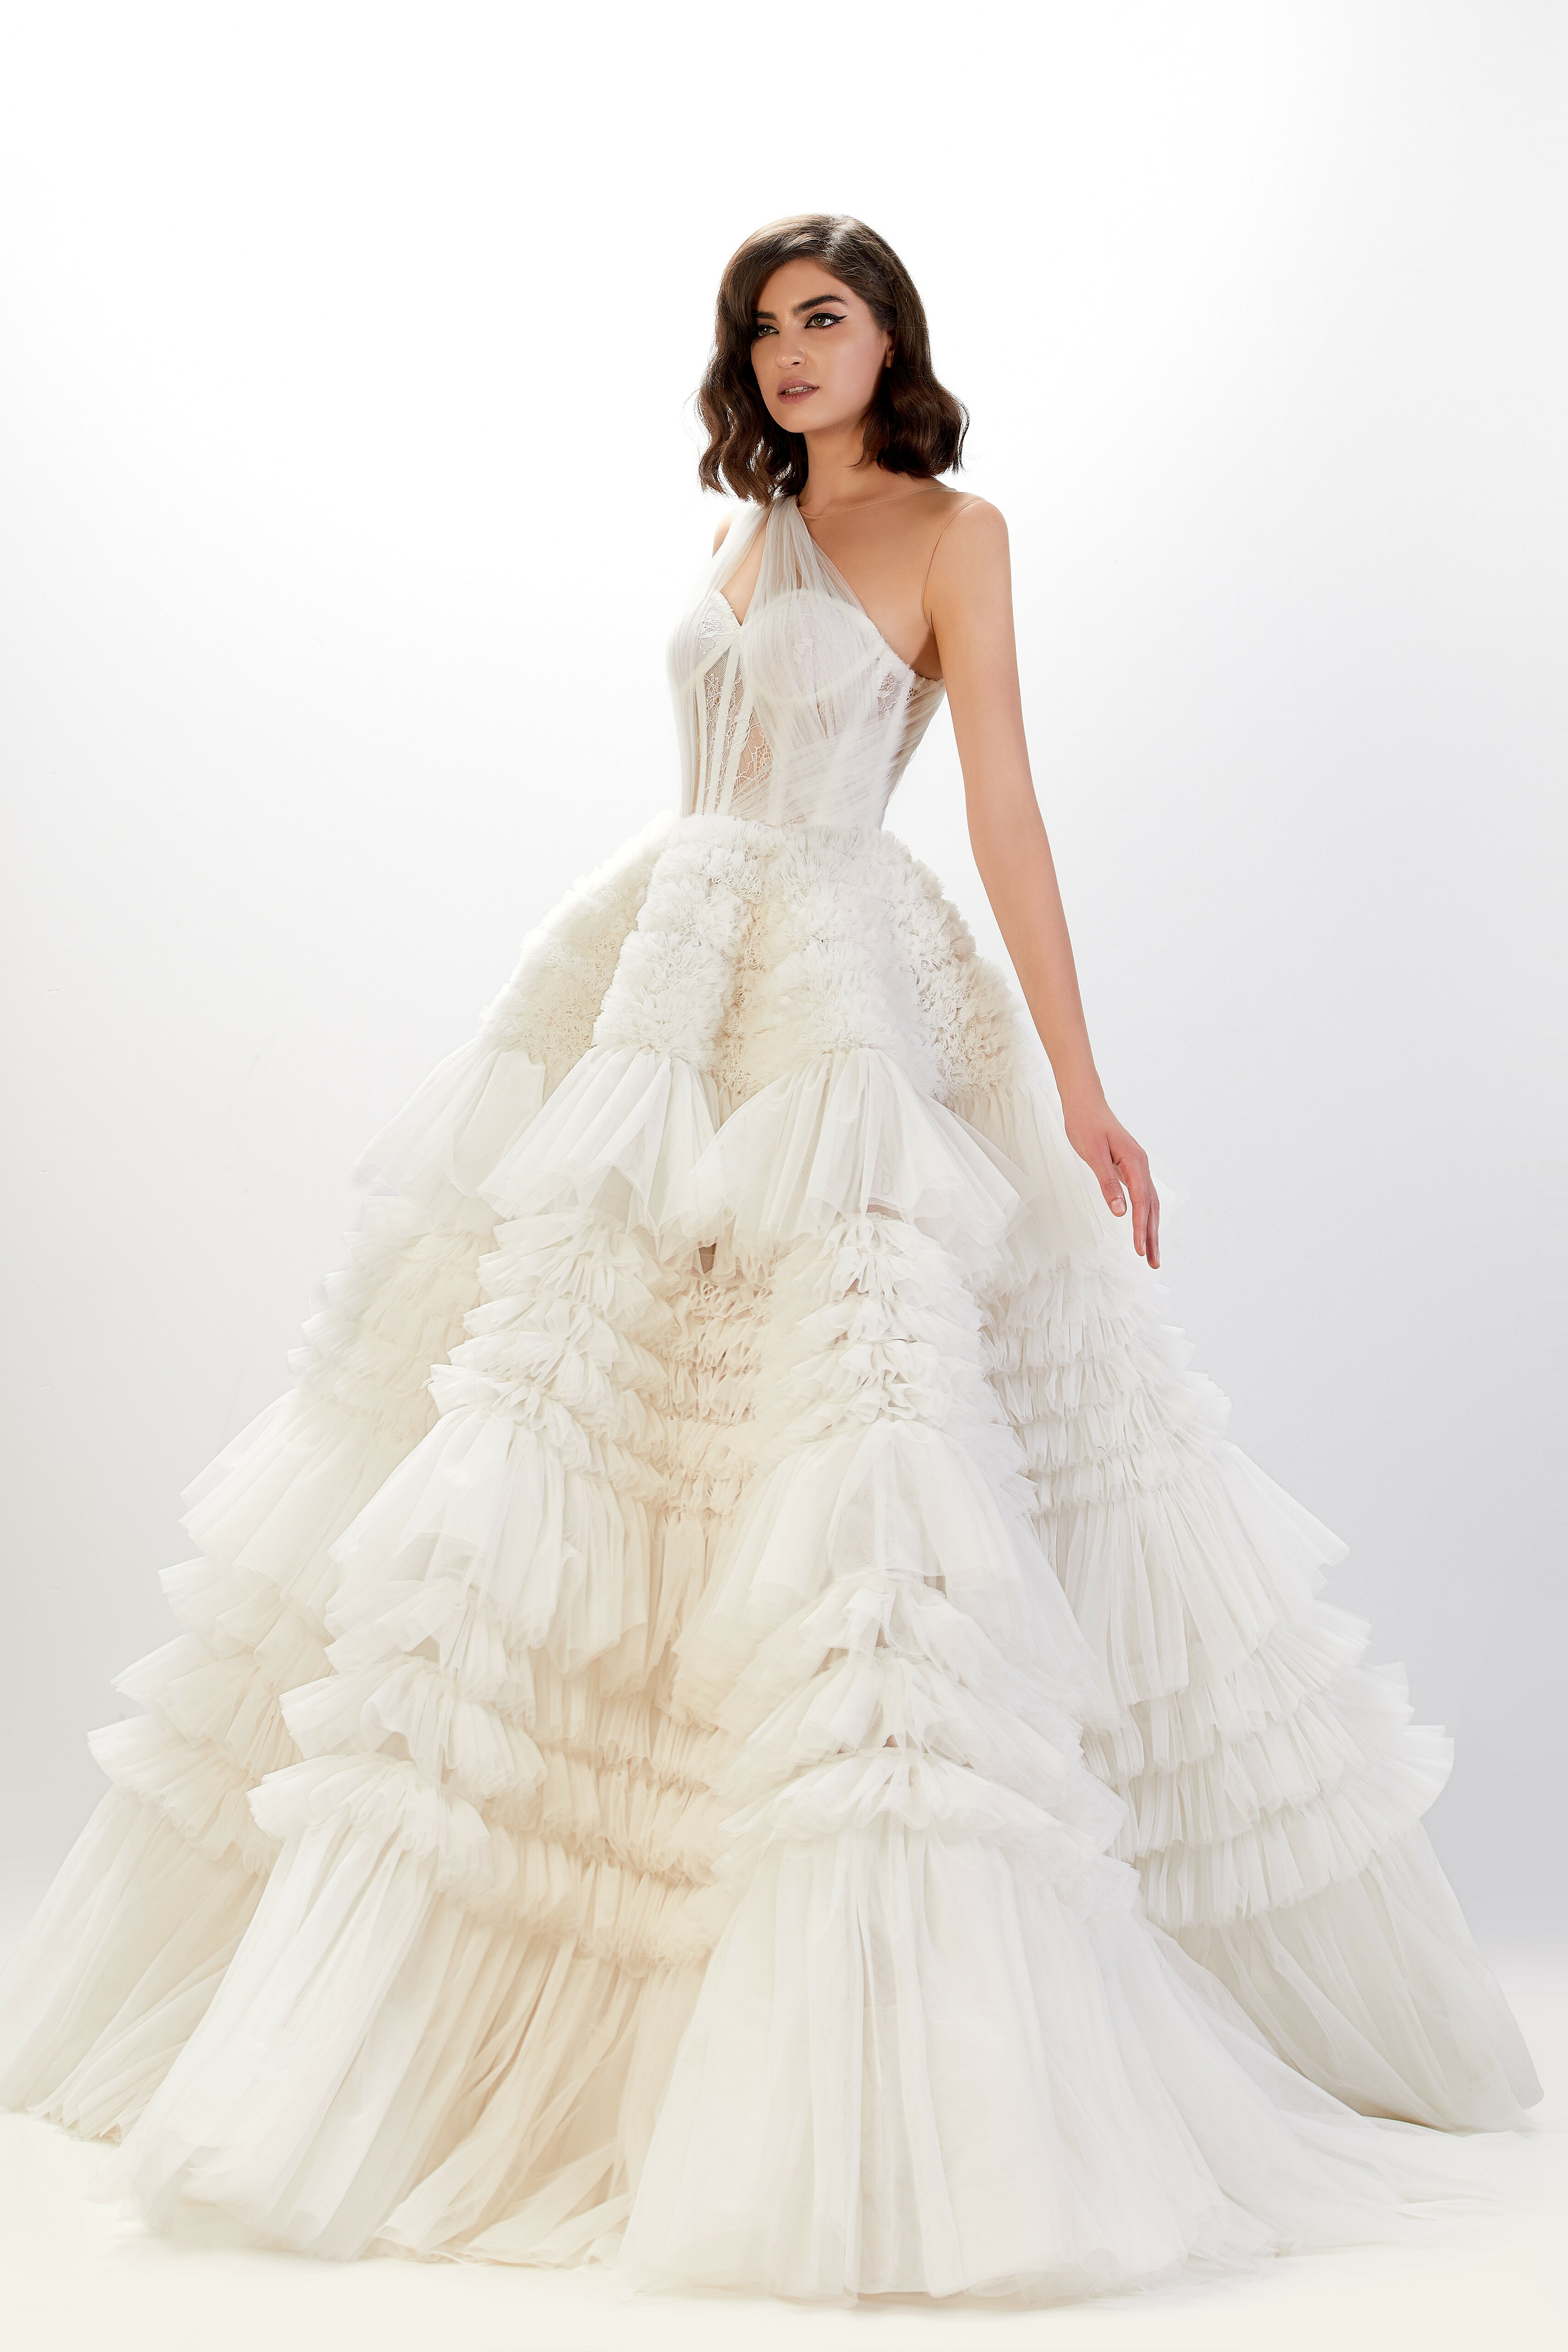 Abdo Aoude Couture White Tulle Gown- District 5 Boutique